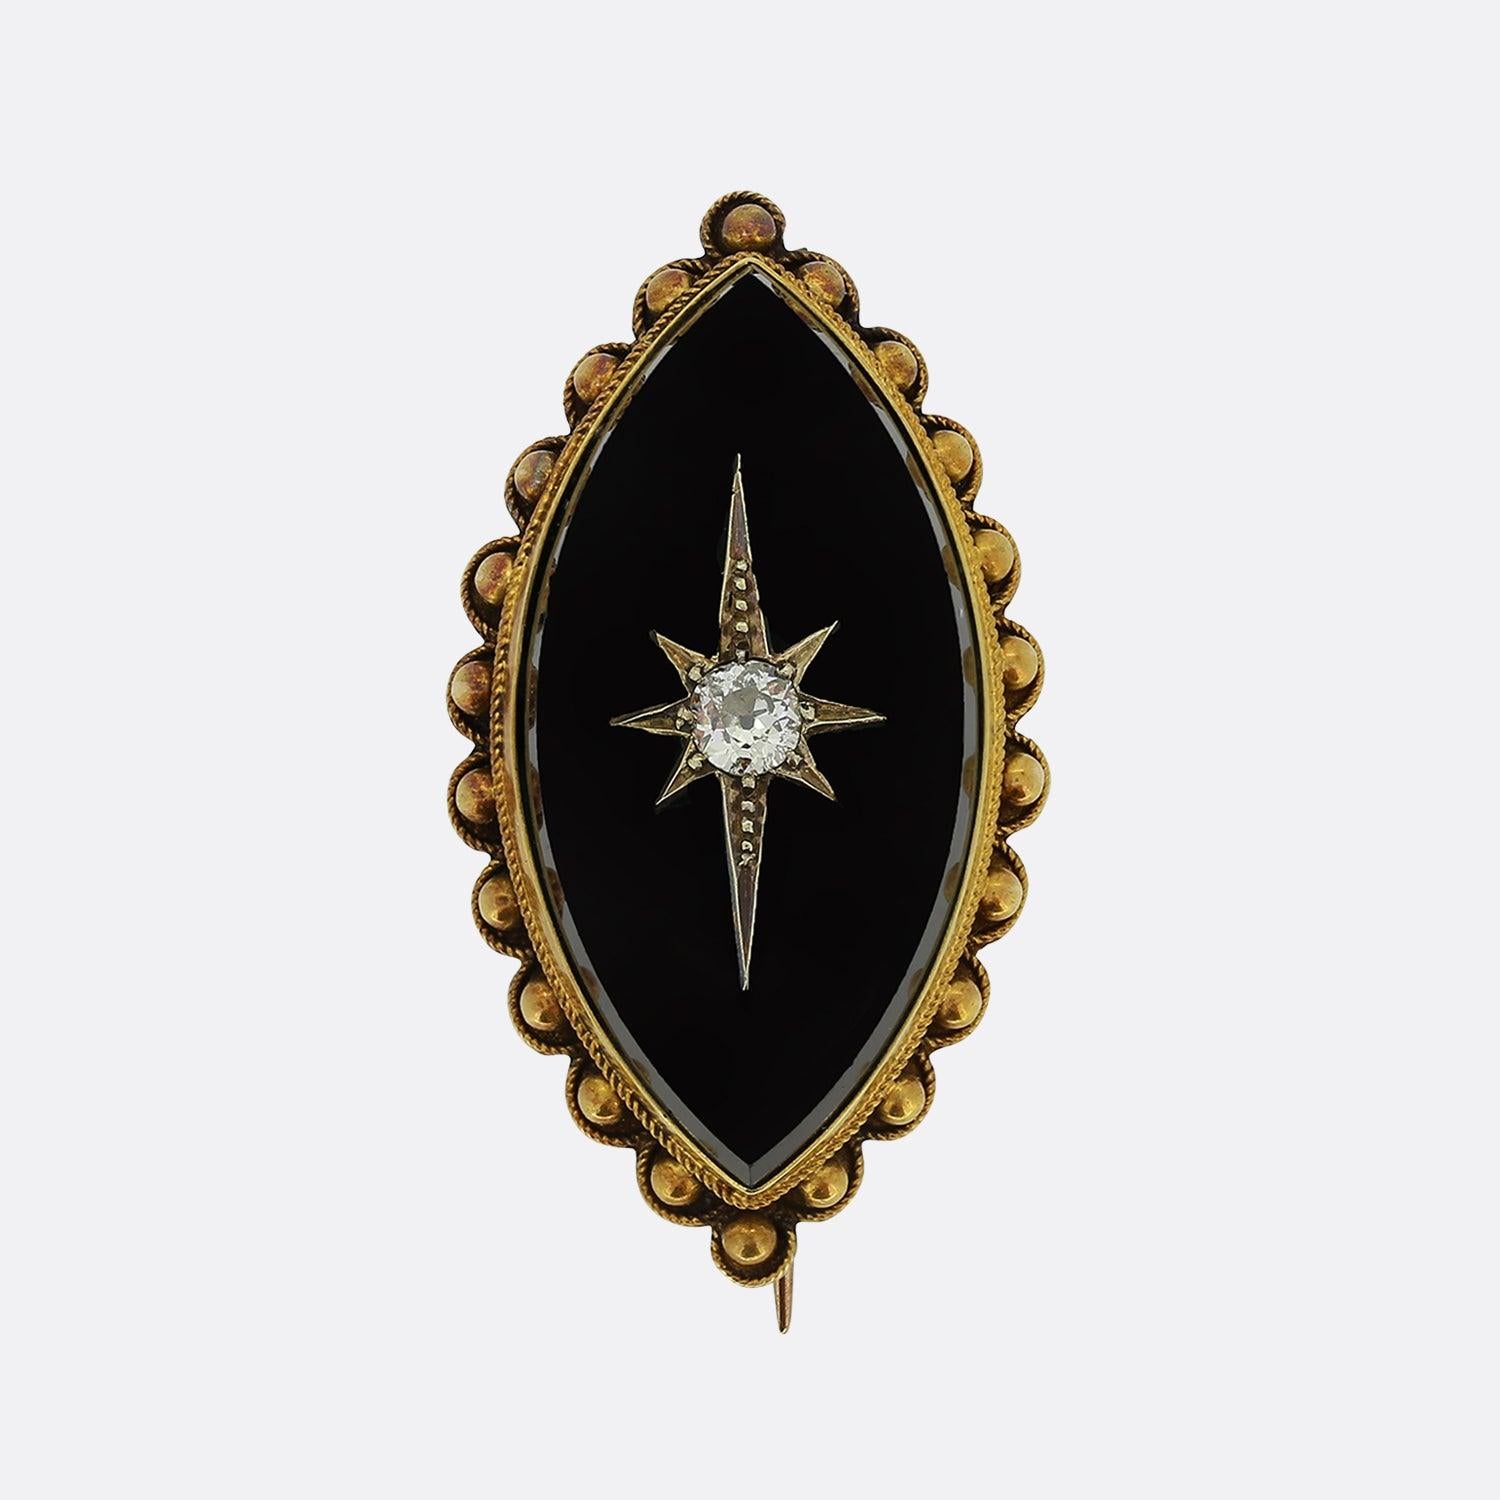 This is a Victorian 15ct yellow gold mourning brooch. The brooch has beautiful etruscan style detail around the edges, a black onyx face with a star set old cut diamond. Like most mourning jewellery the back of the brooch opens up in a locket